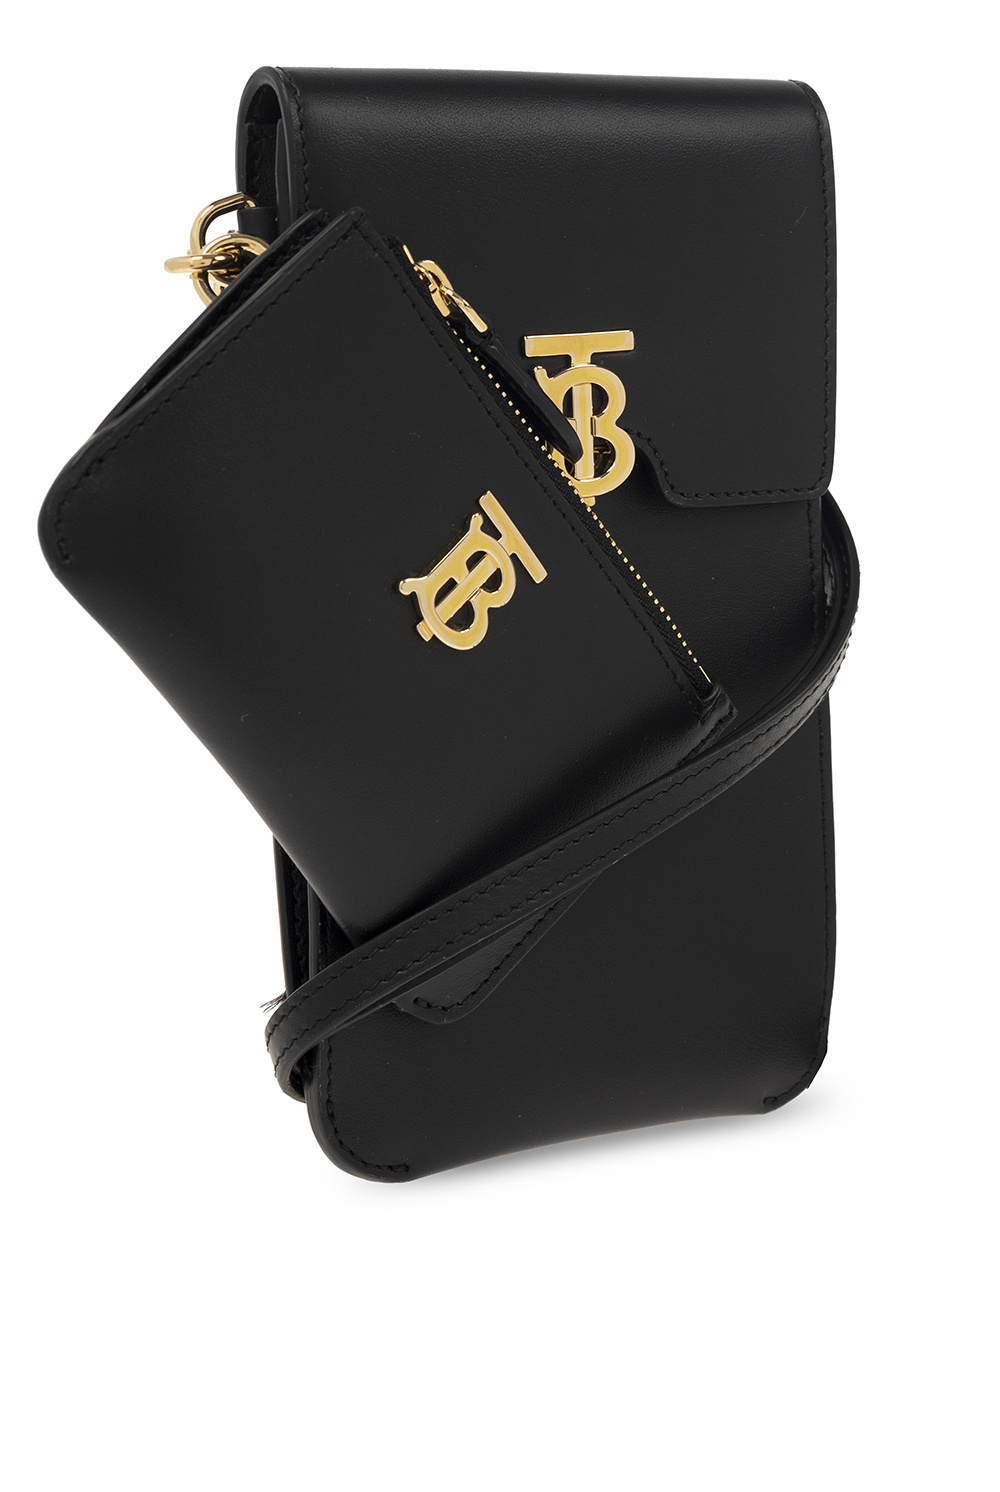 Burberry Phone holder and pouch with strap | Women's Accessories | Vitkac